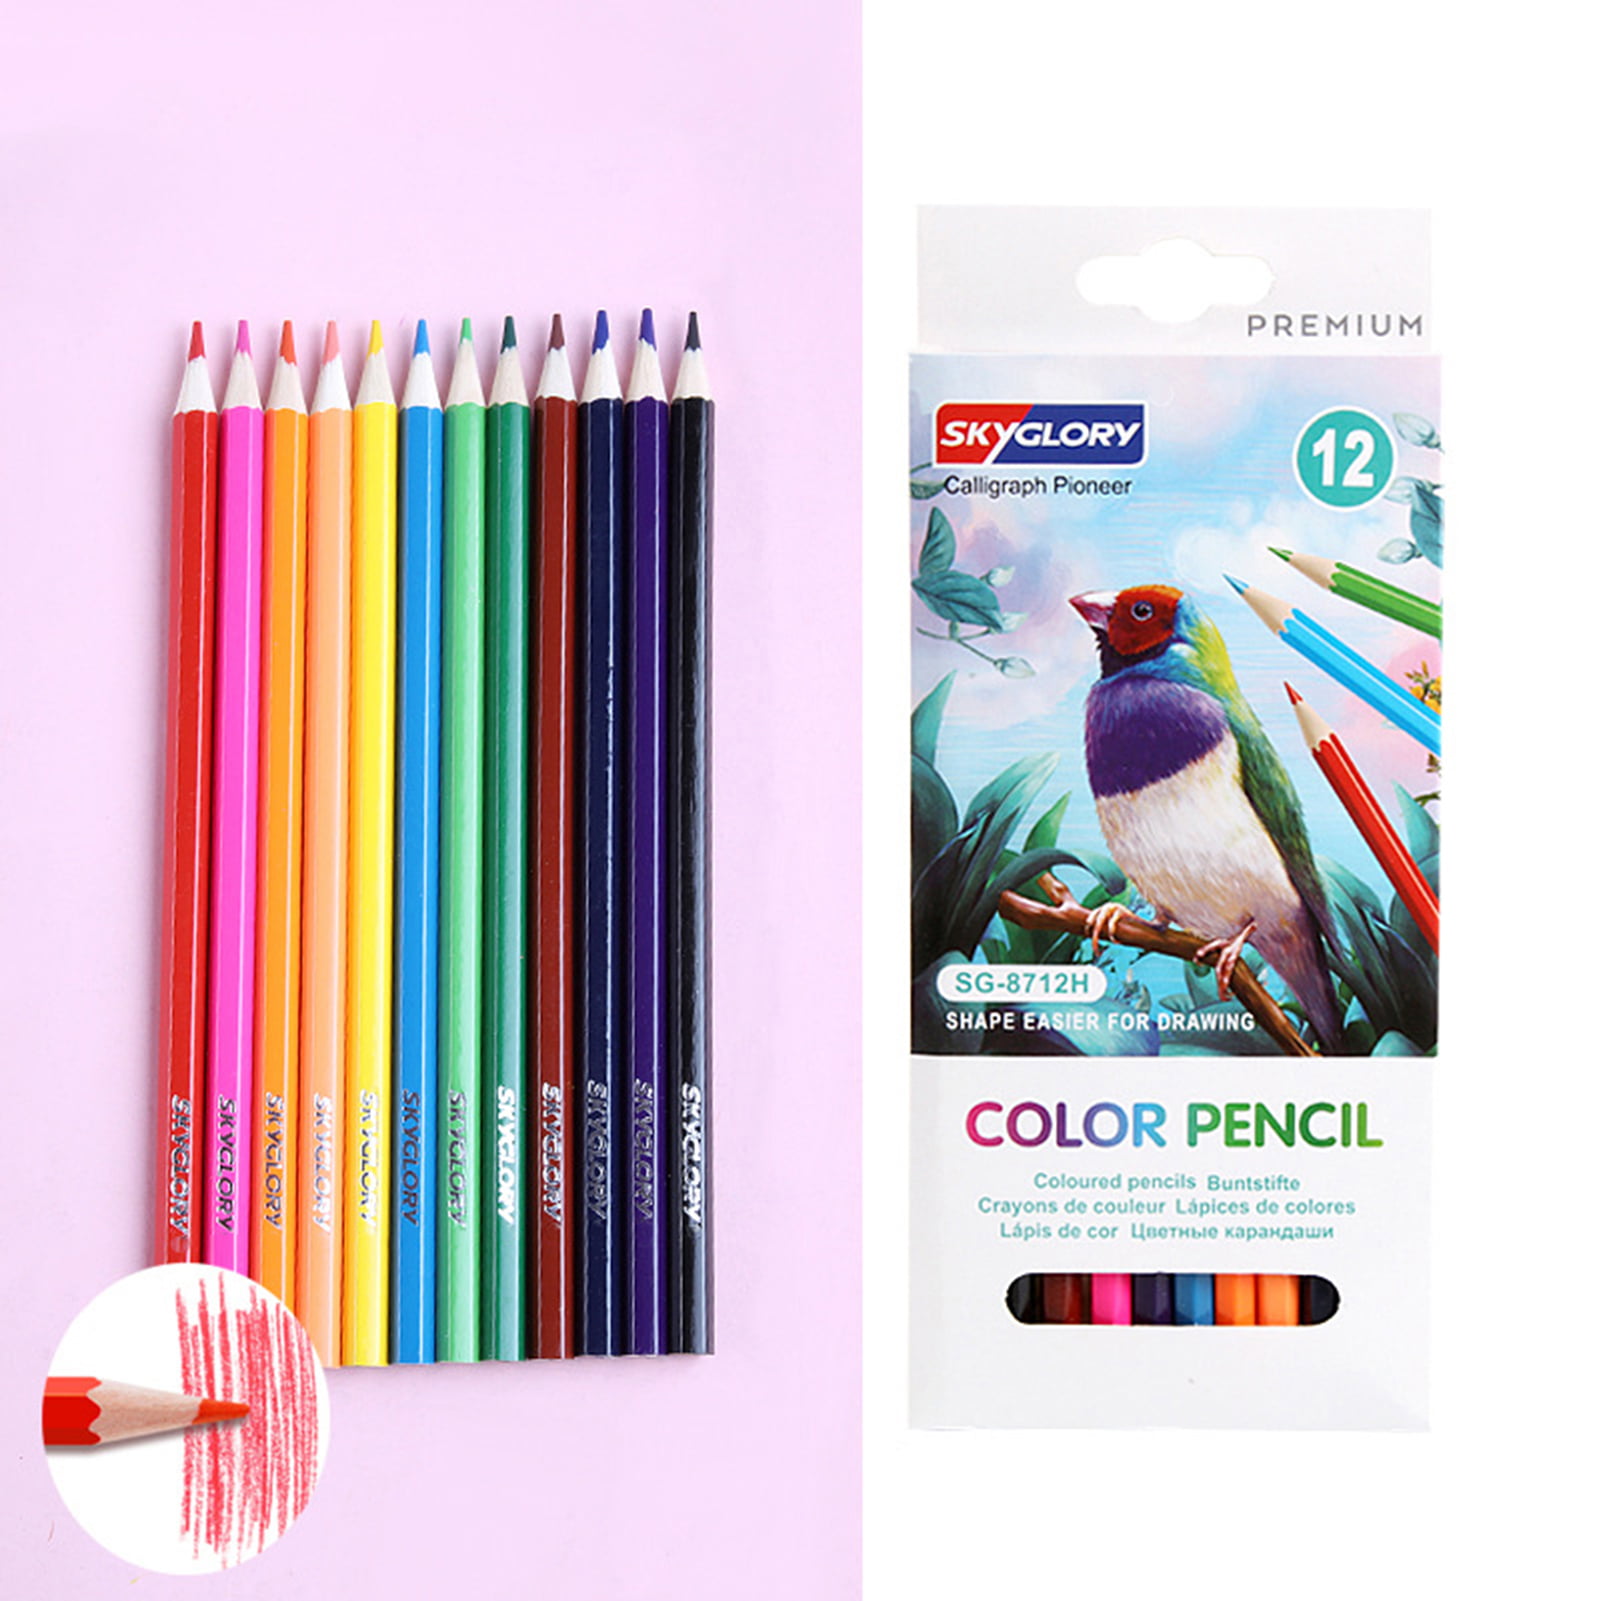 Colored Pencils – Just A Buck and Beyond Online